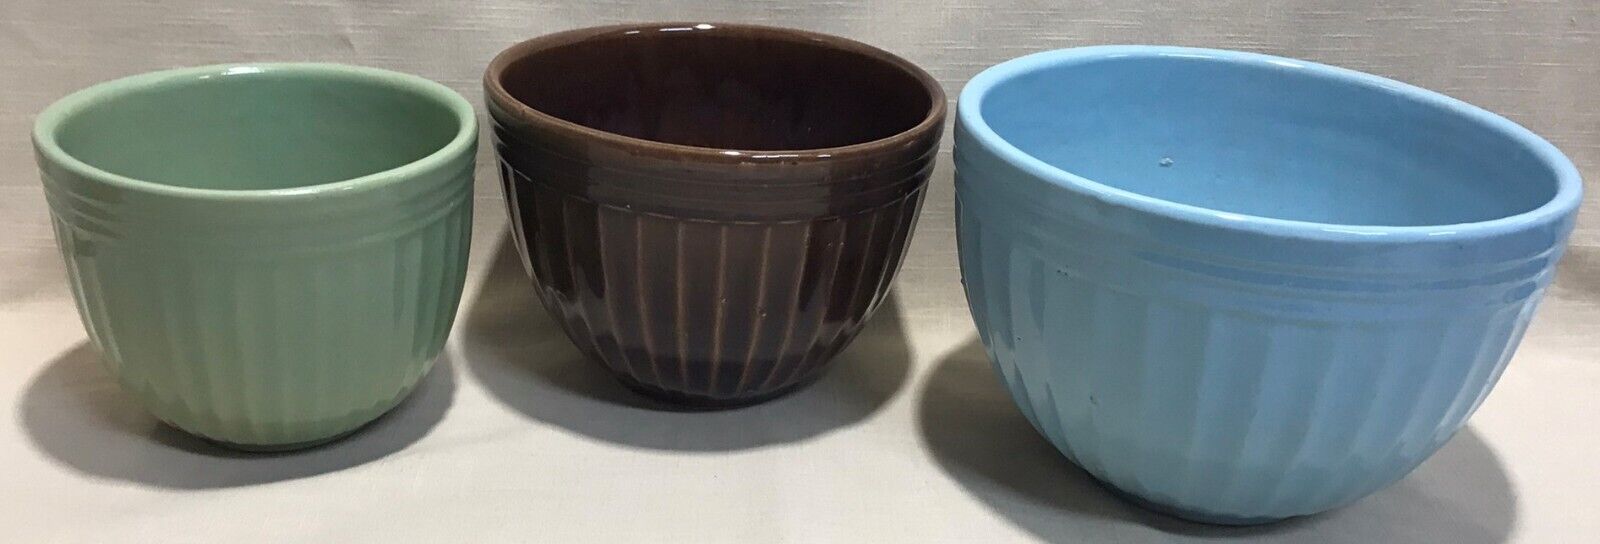 Crockery/Earthenware 3pc Mixing Bowl Set Vintage Ribbed Kitchen Collectibles